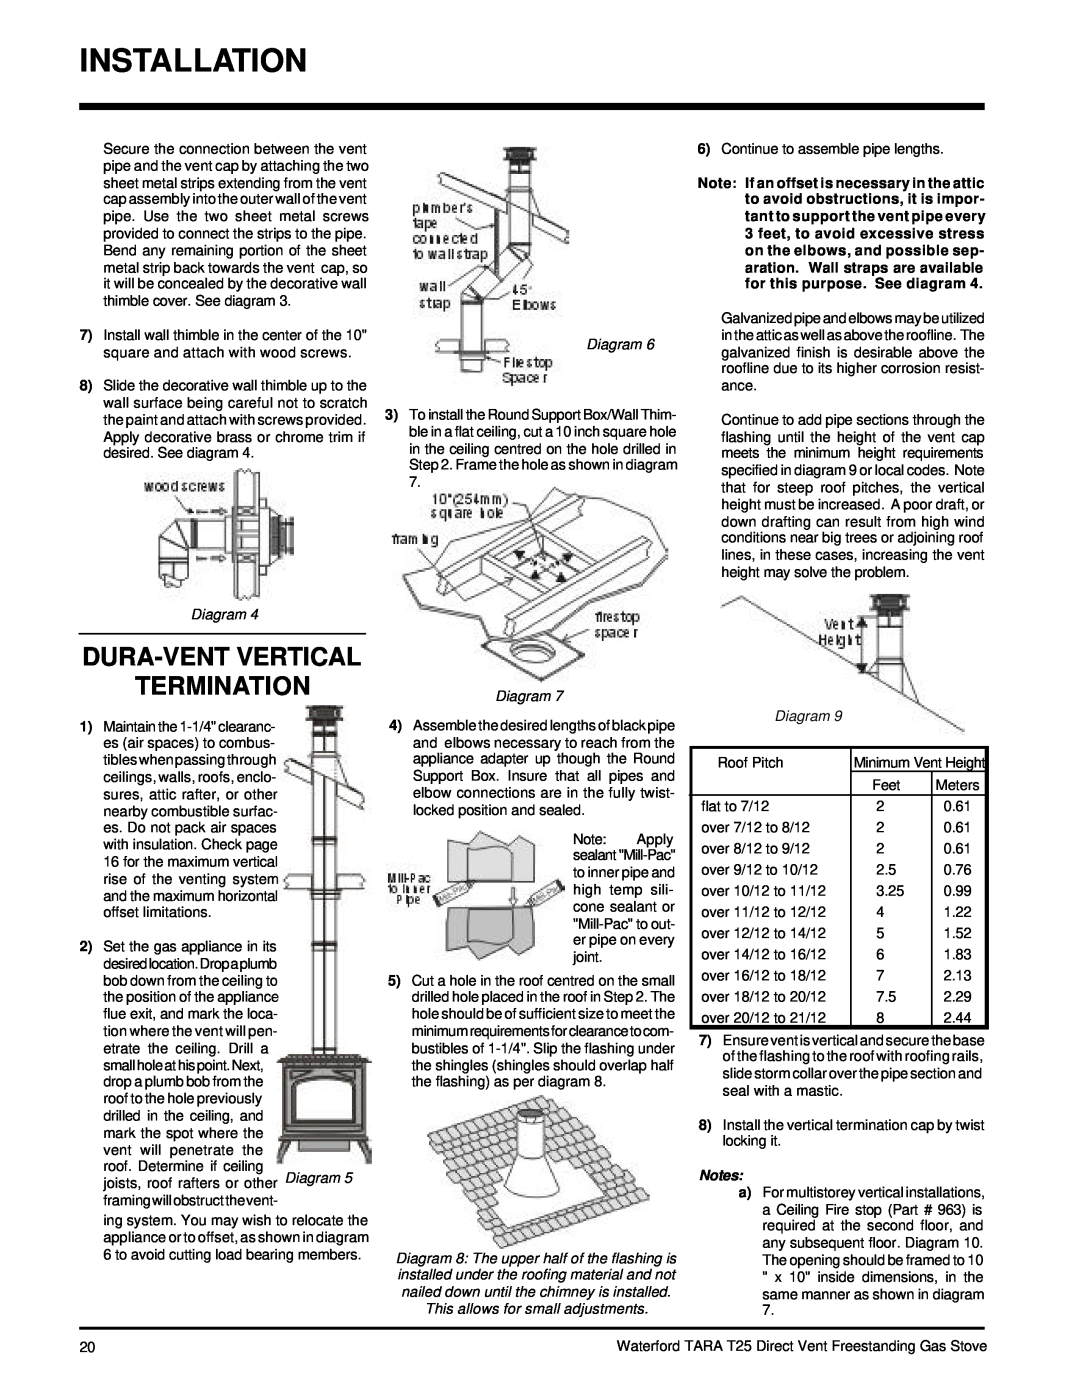 Waterford Appliances T25-NG, T25-LP installation manual Termination, Dura-Ventvertical, Notes 